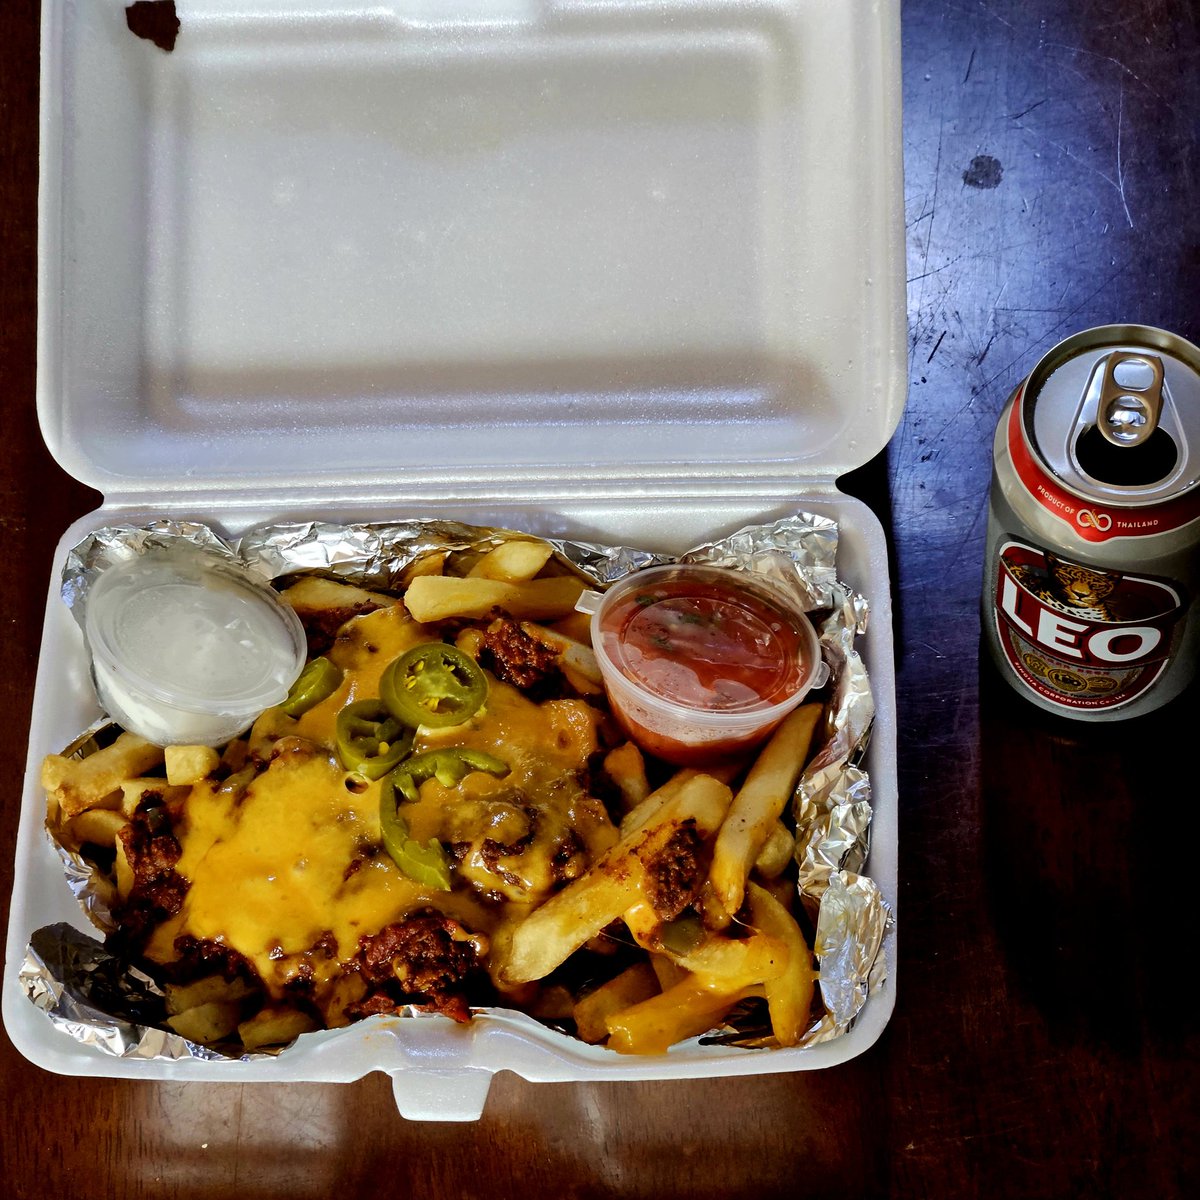 Just can't stop ordering the Chilli Cheese Fries from @TheGame_BKK 
6th order this week, because they go so well with ice cold cans of Leo🙂